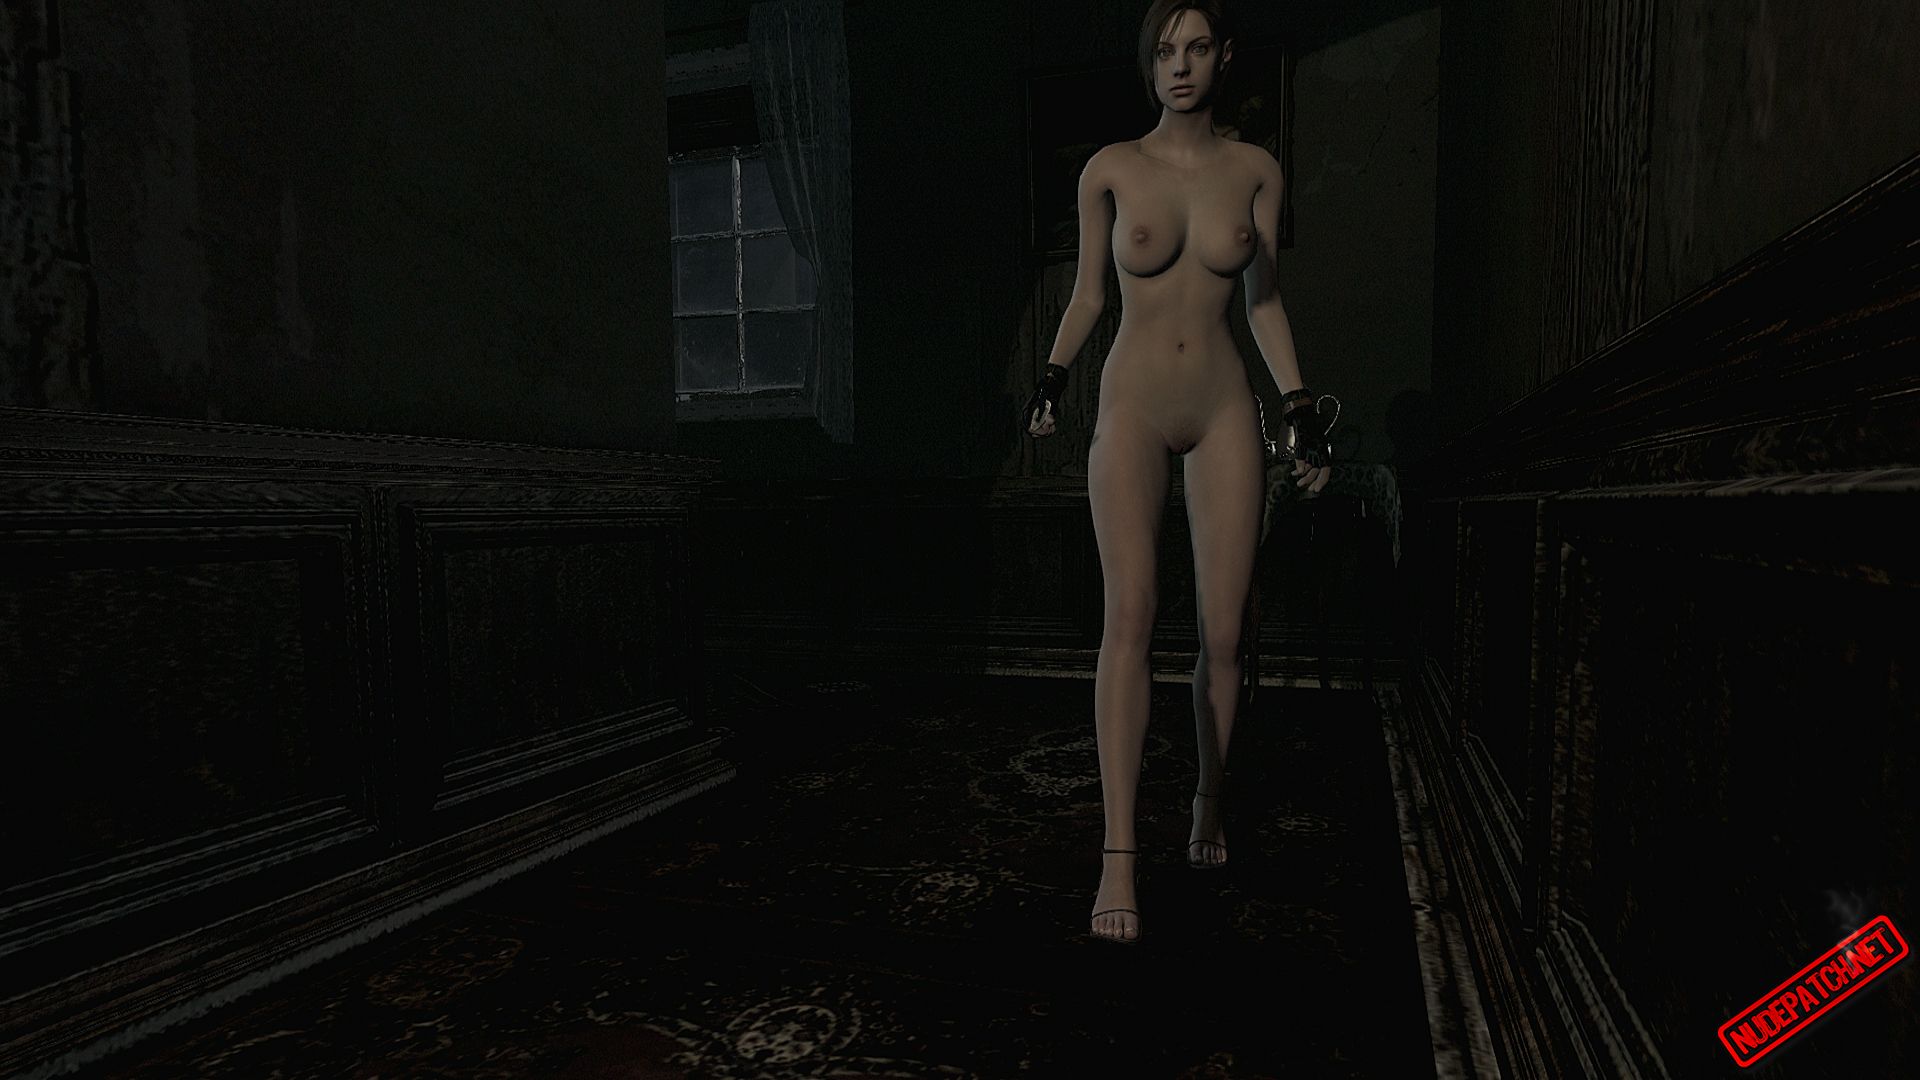 april lanier recommends resident evil hd nude mod pic